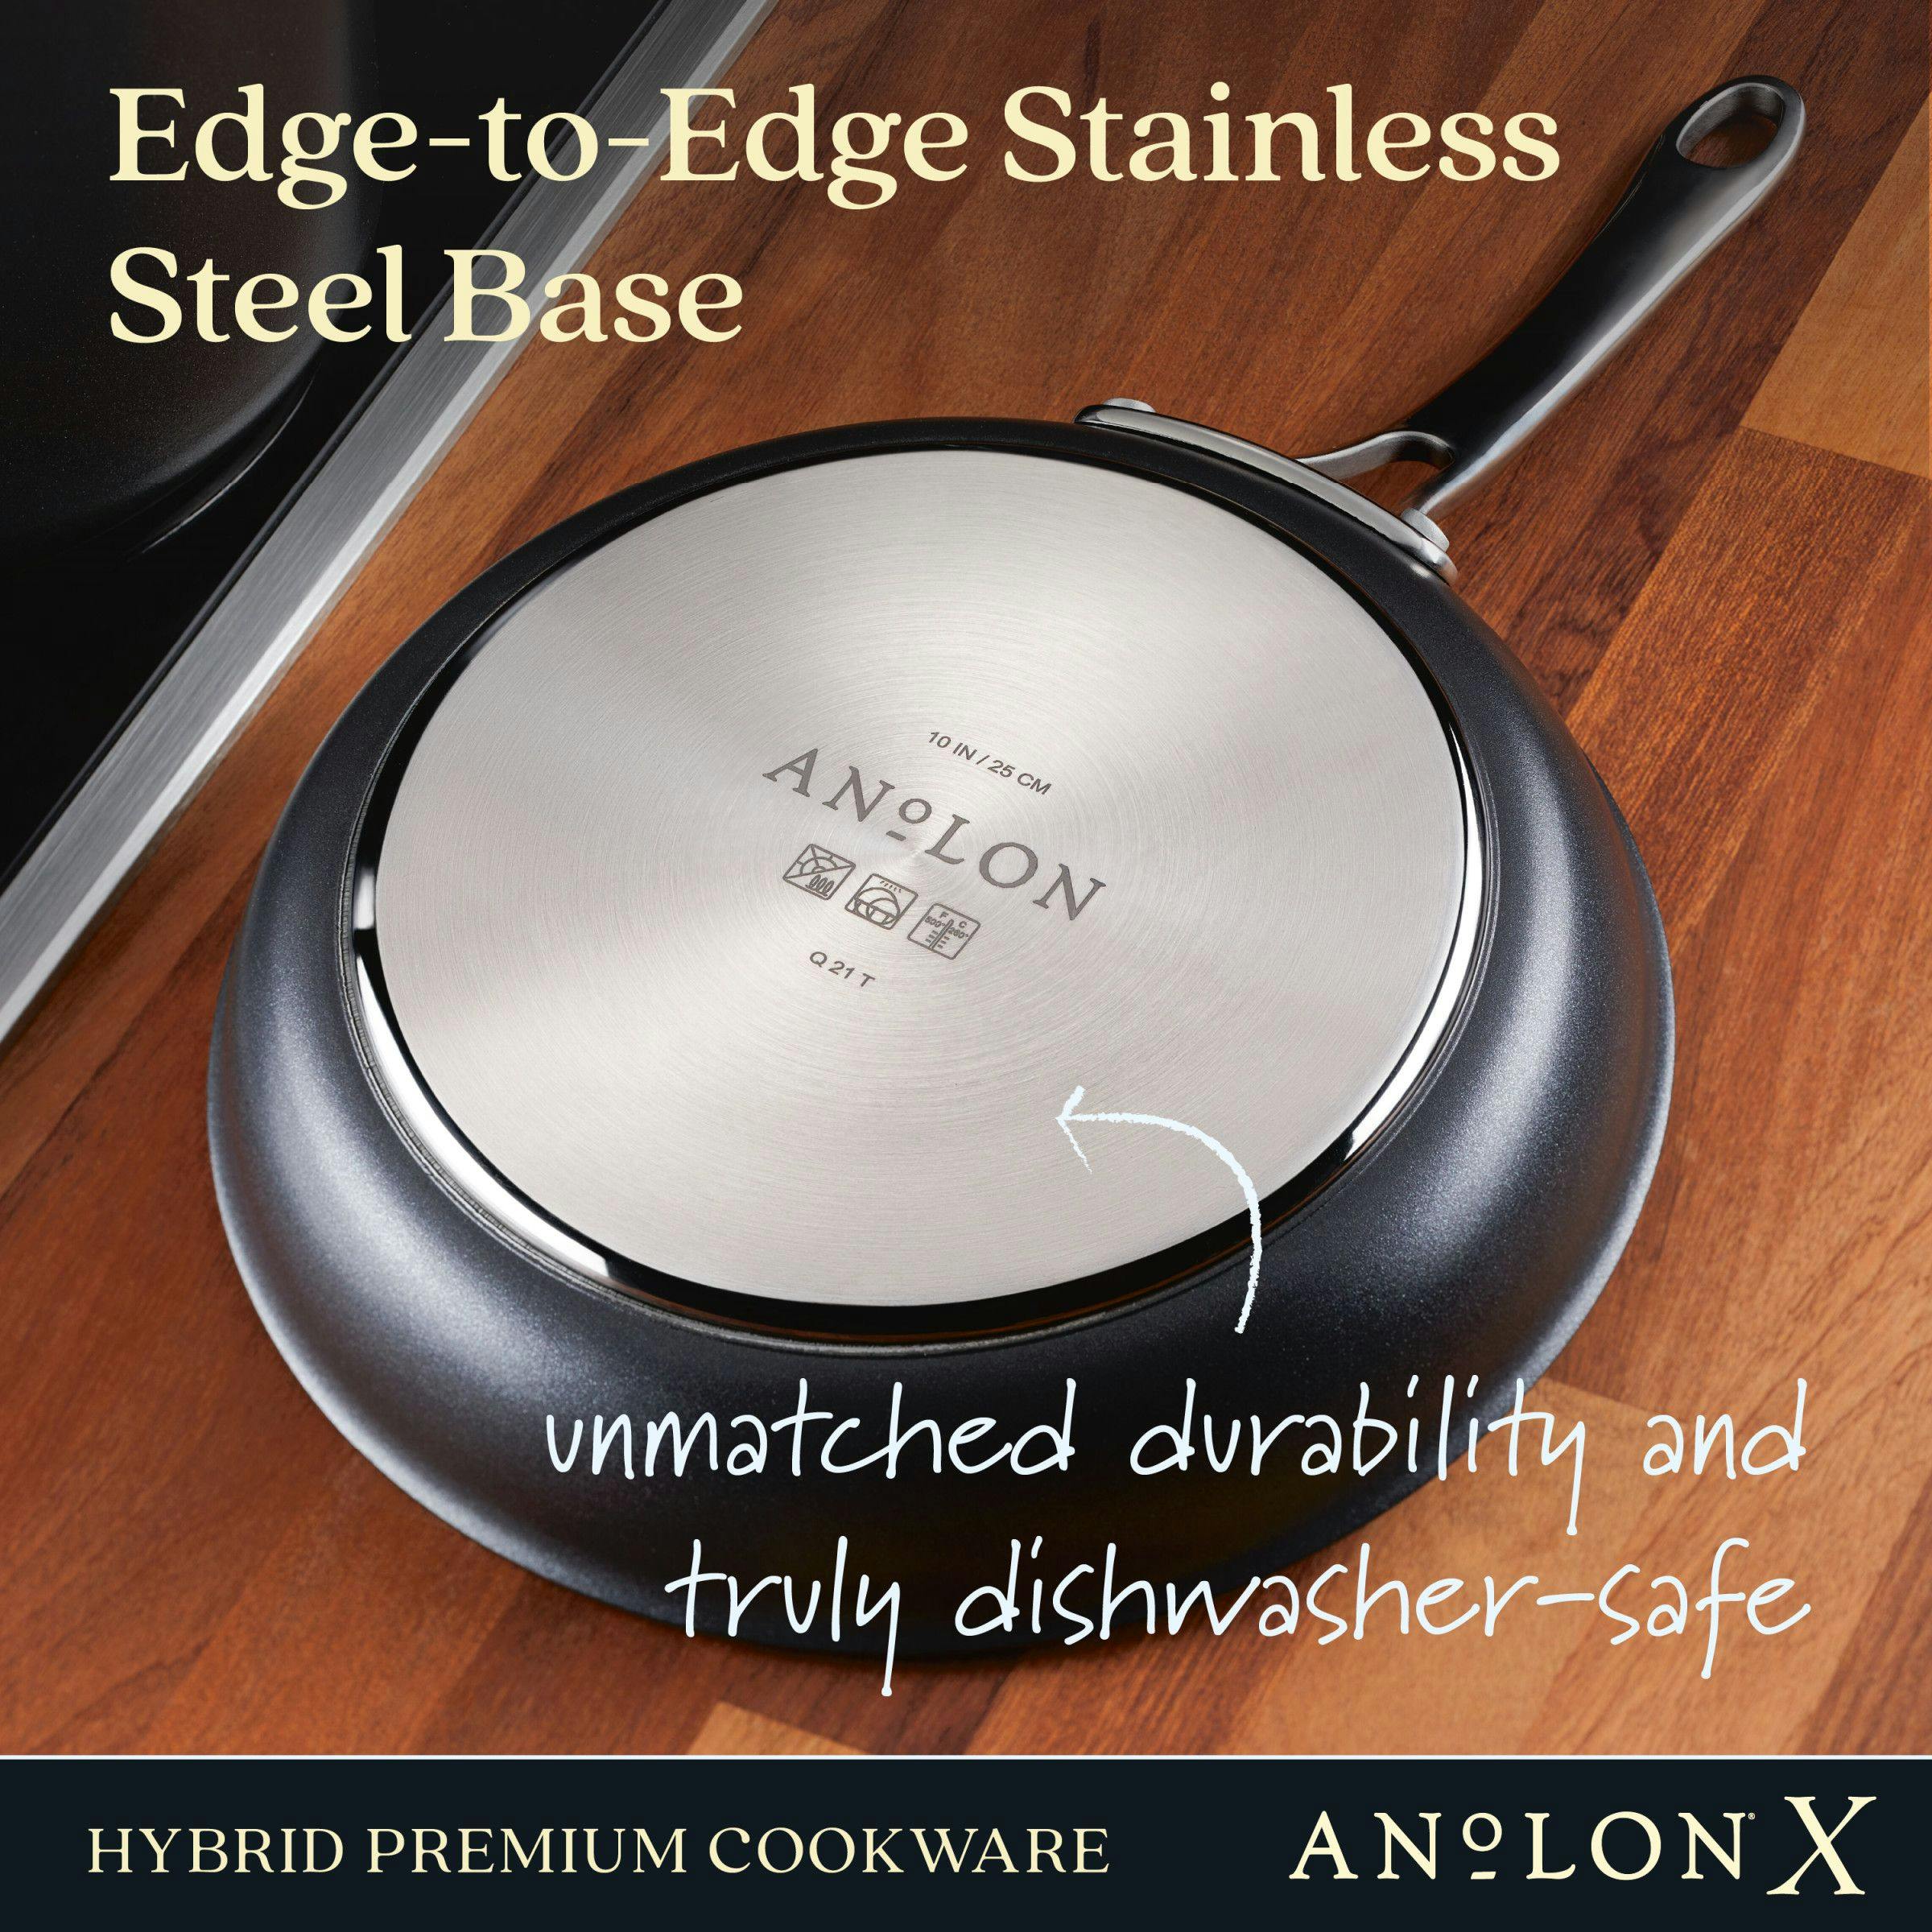 Anolon Advanced Hard Anodized Nonstick Frying / Fry Pan / Skillet - 8 Inch,  Gray